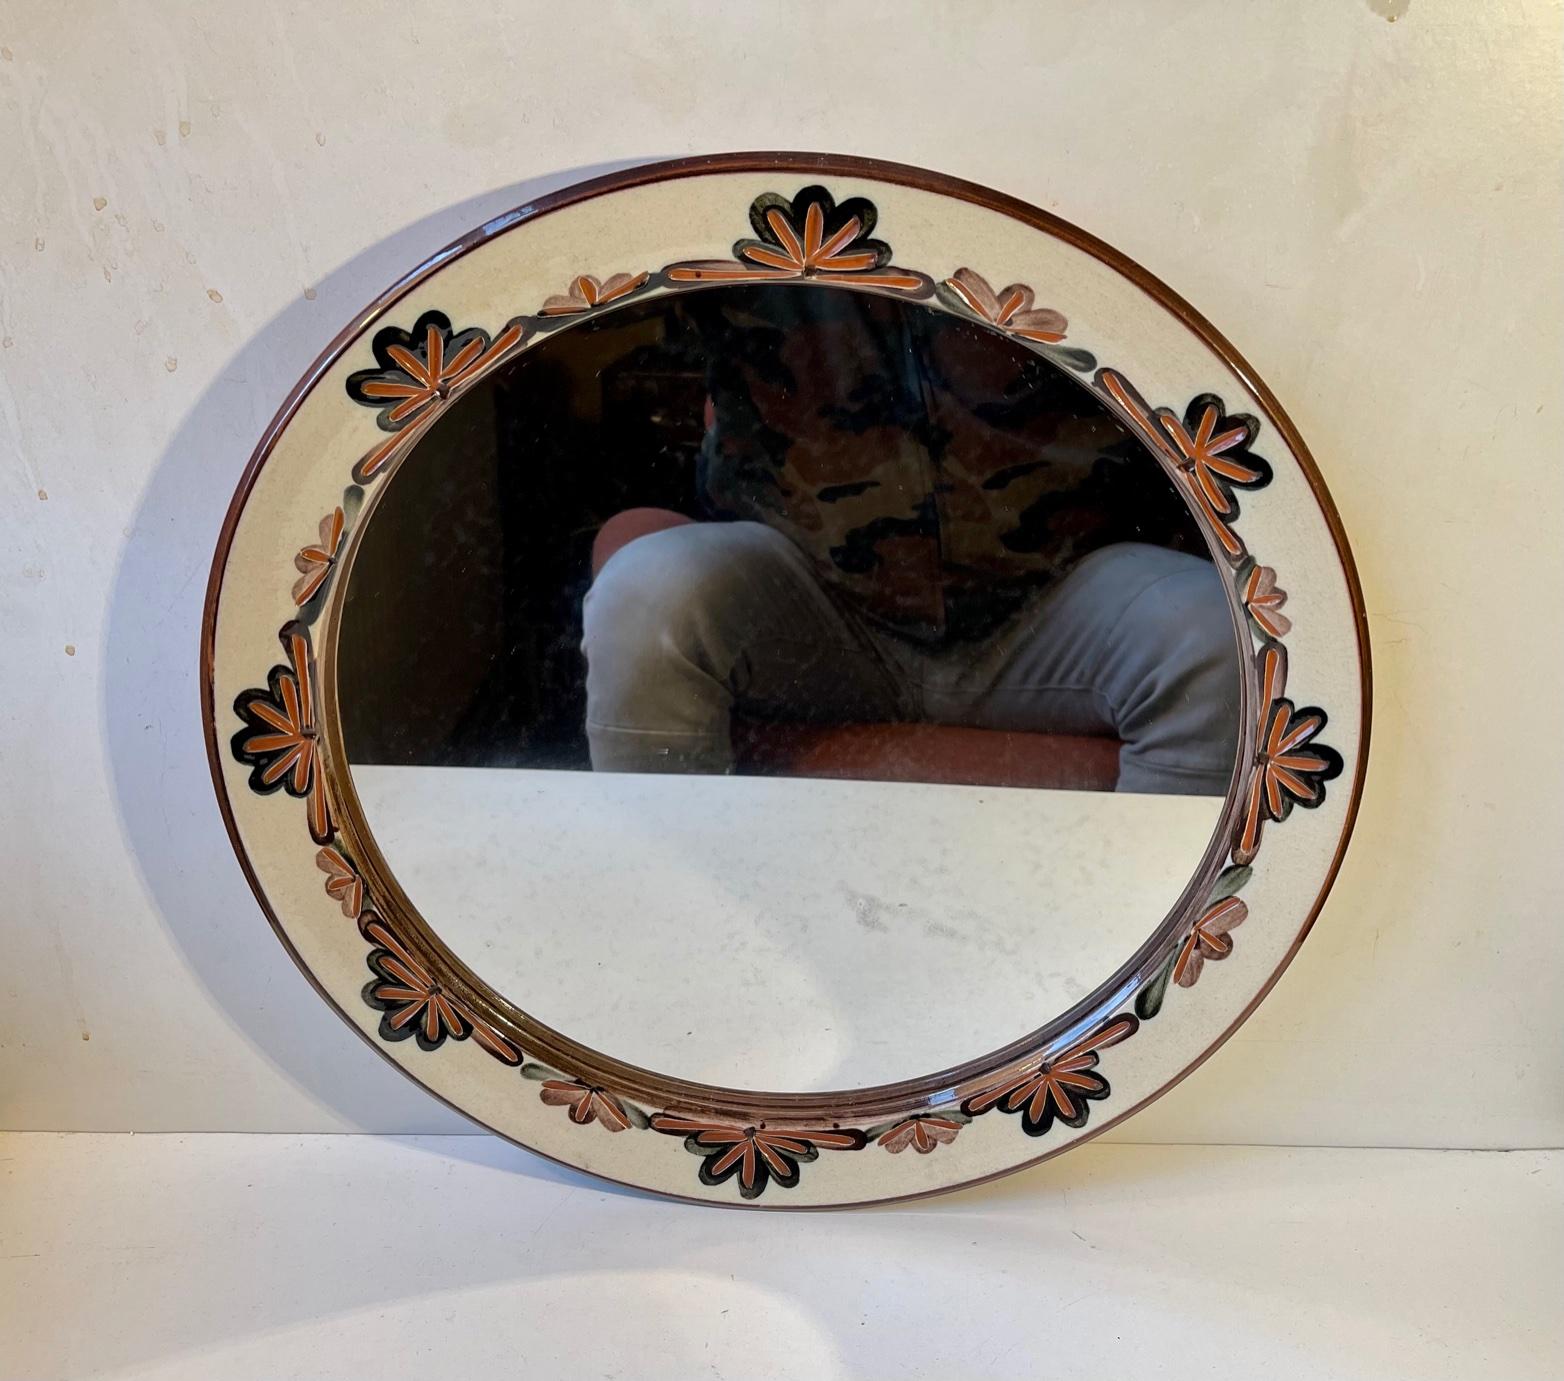 Mid-Century Modern Midcentury Circular Wall Mirror in Ceramic by Zoltan Kiss for Knabstrup, 1960s For Sale